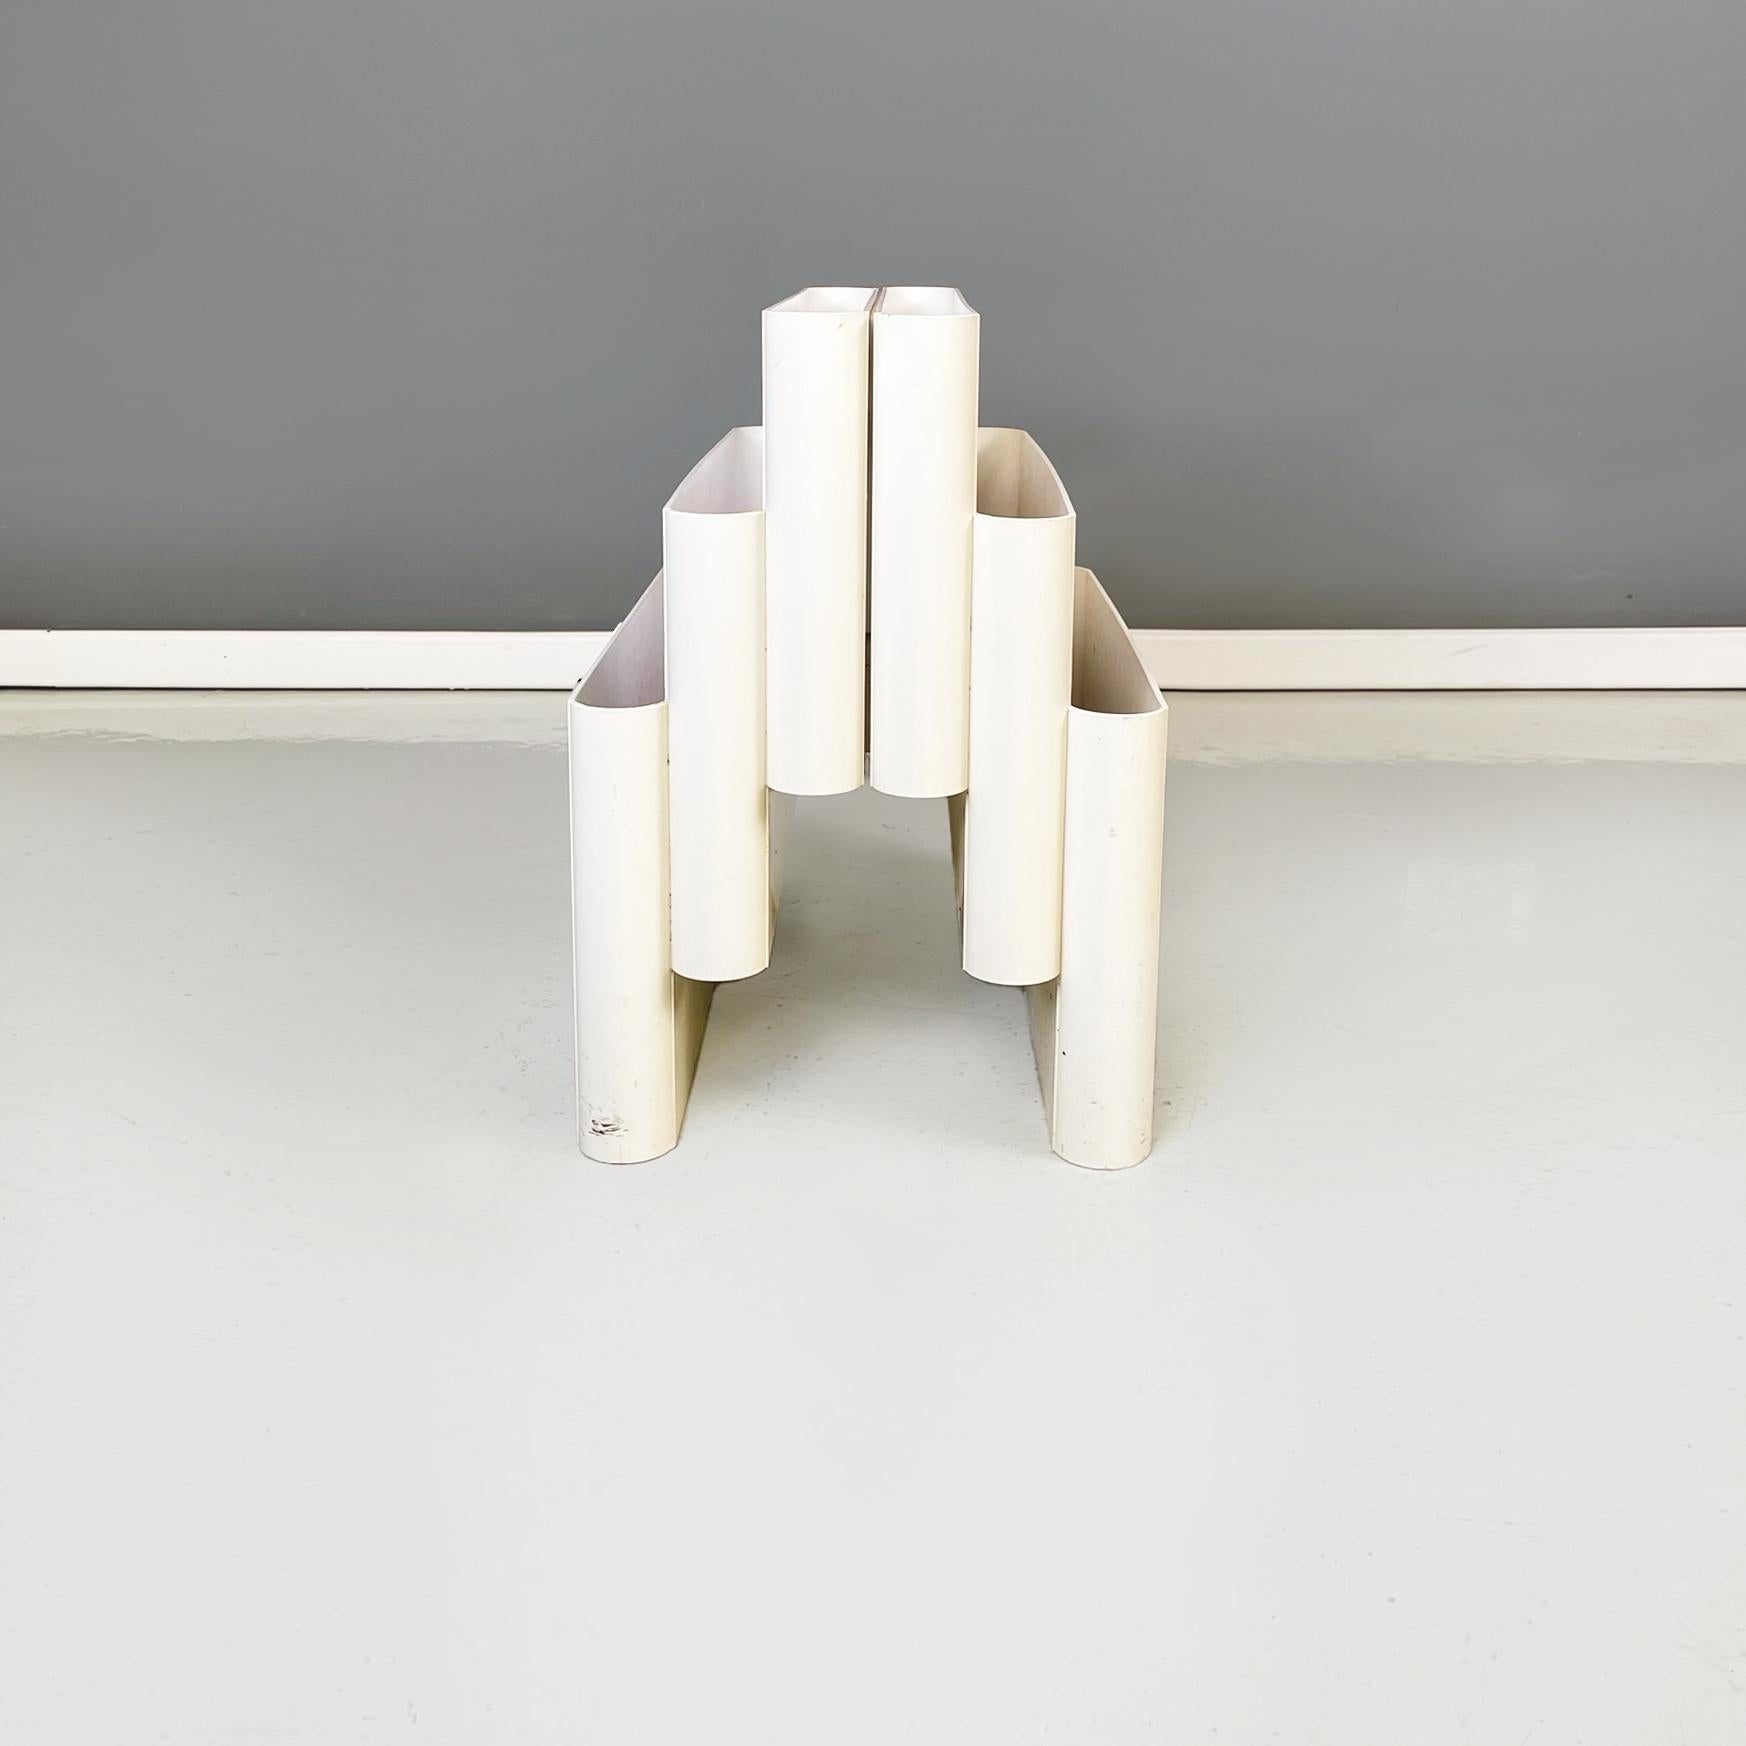 Italian Modern White Plastic Magazine Rack 4675 by Stoppino for Kartell, 1970s In Good Condition For Sale In MIlano, IT